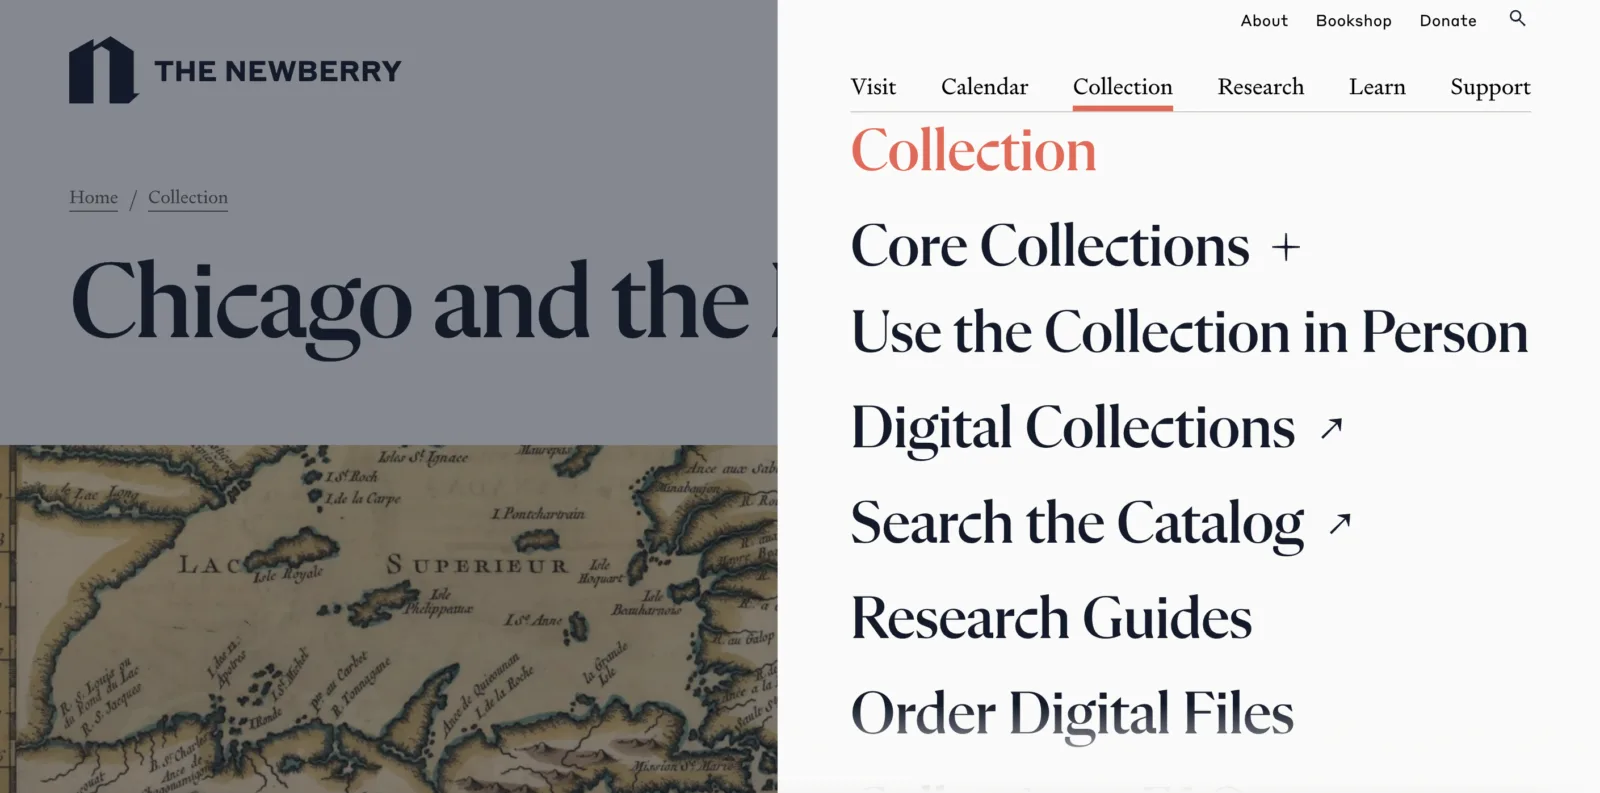 A website menu has a list of pages related to the Newberry collection.